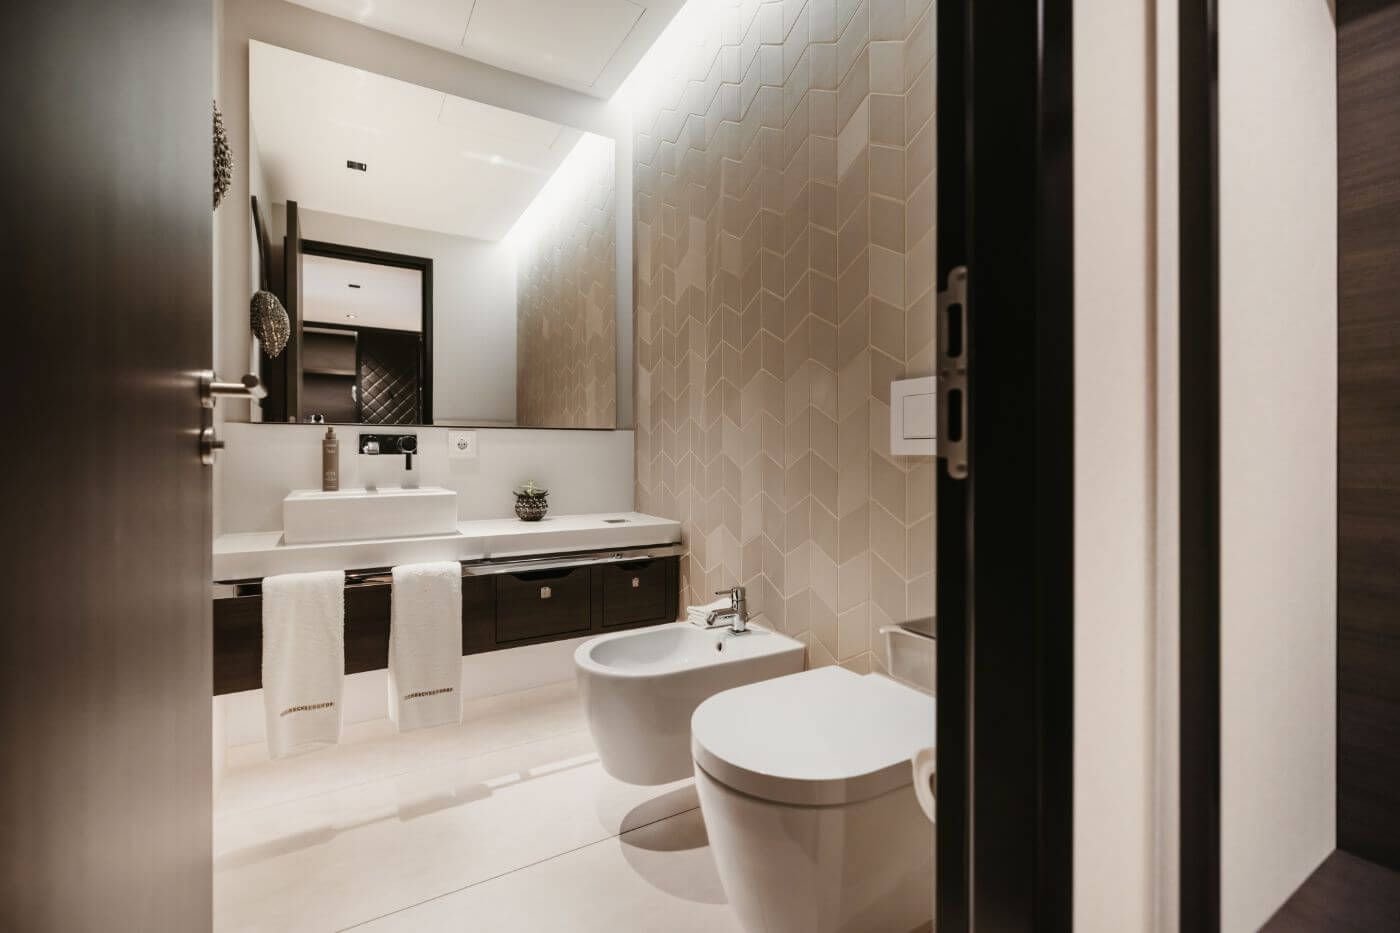 View of the bright bathroom with large mirror, WC and bidet